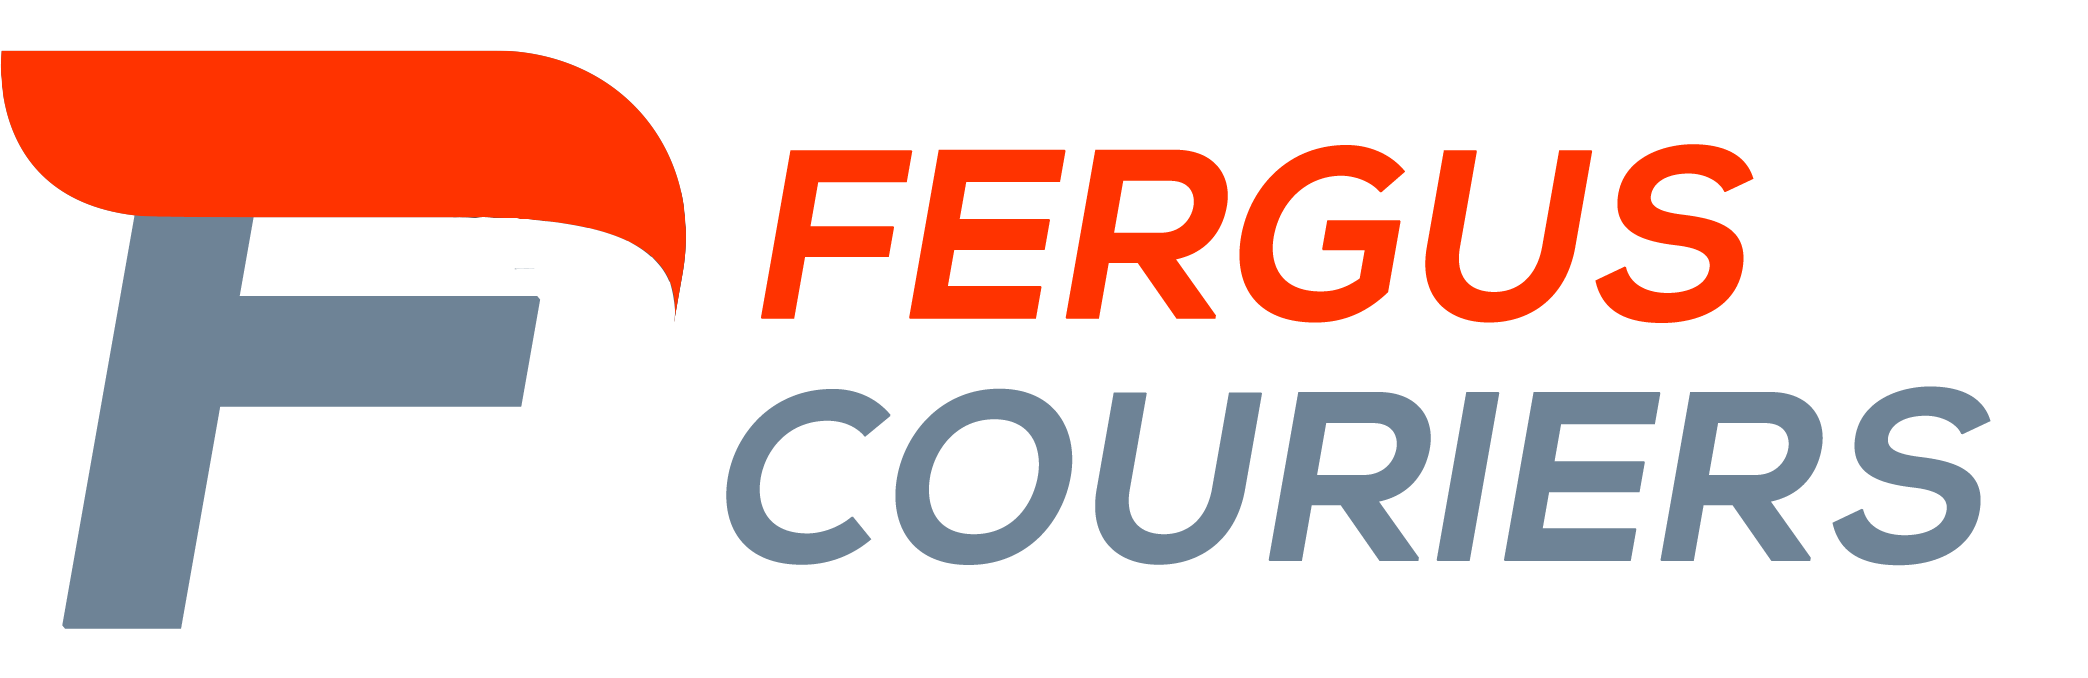 Fergus Couriers